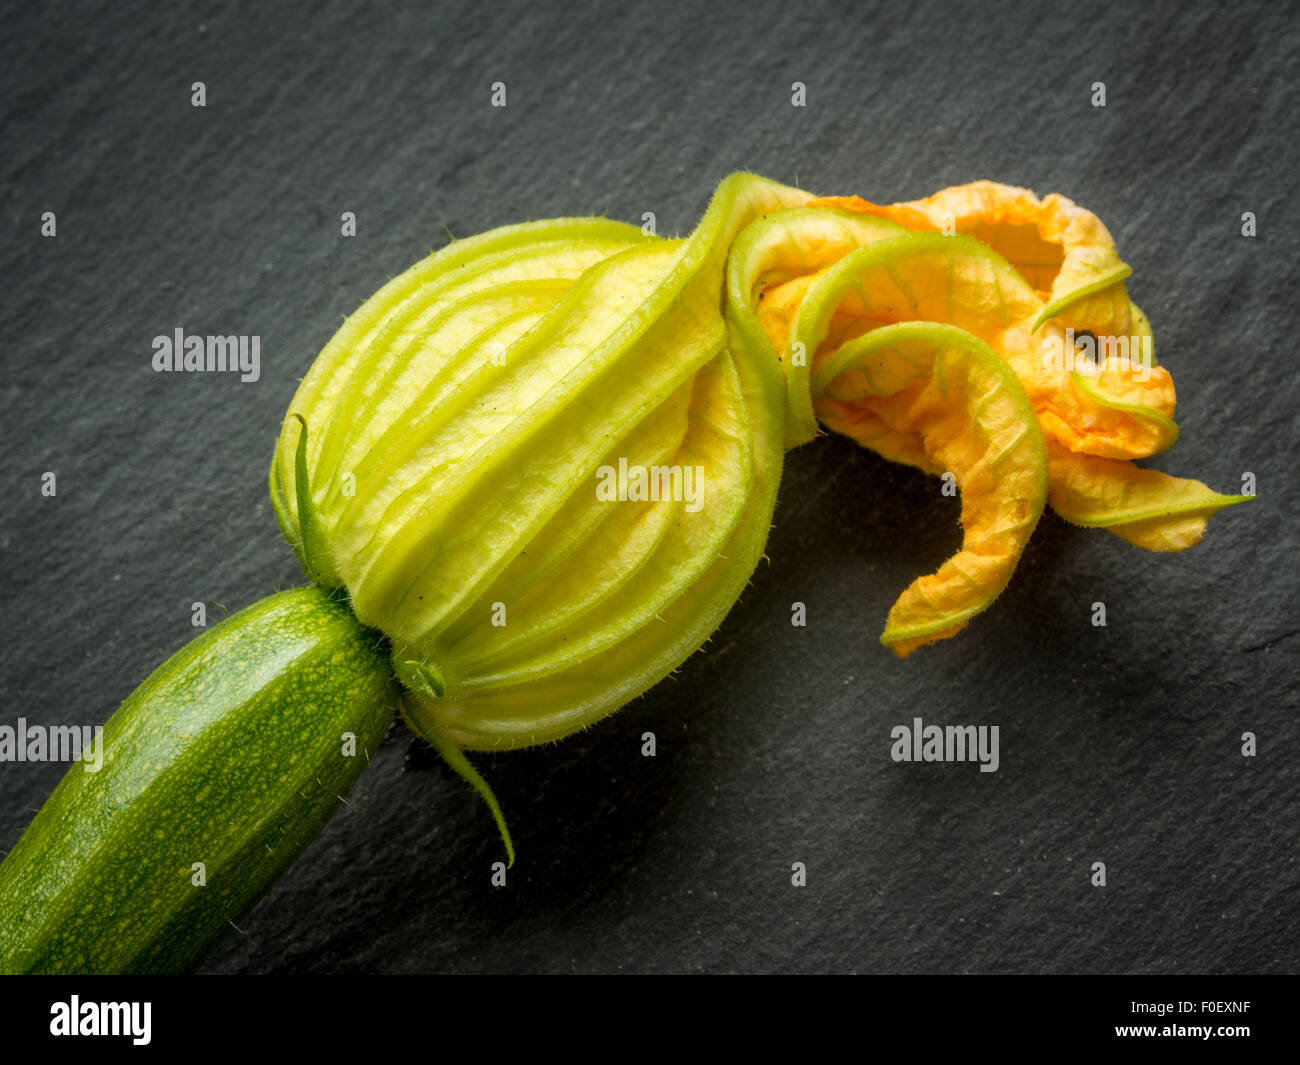 Courgette flower Stock Photo